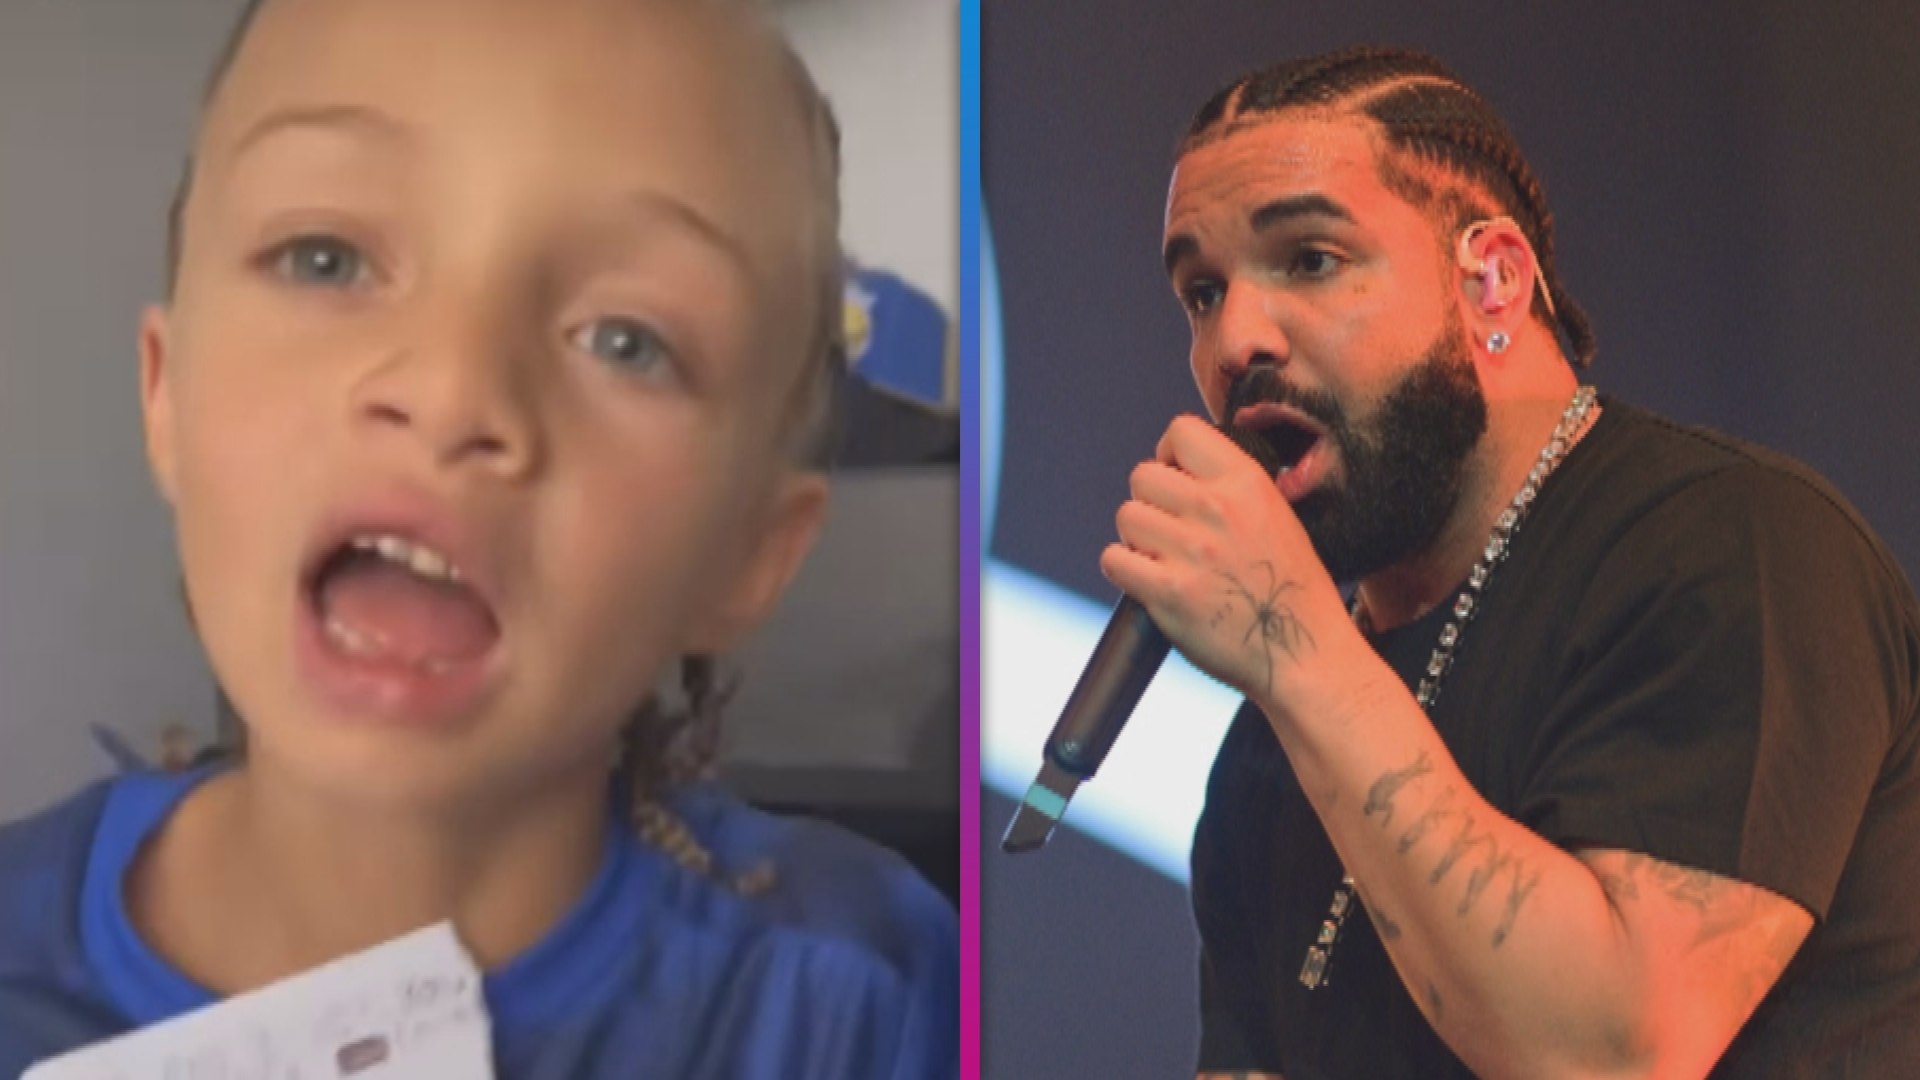 Drake's Son Adonis Raps on His New Album and Fans' Thoughts Are